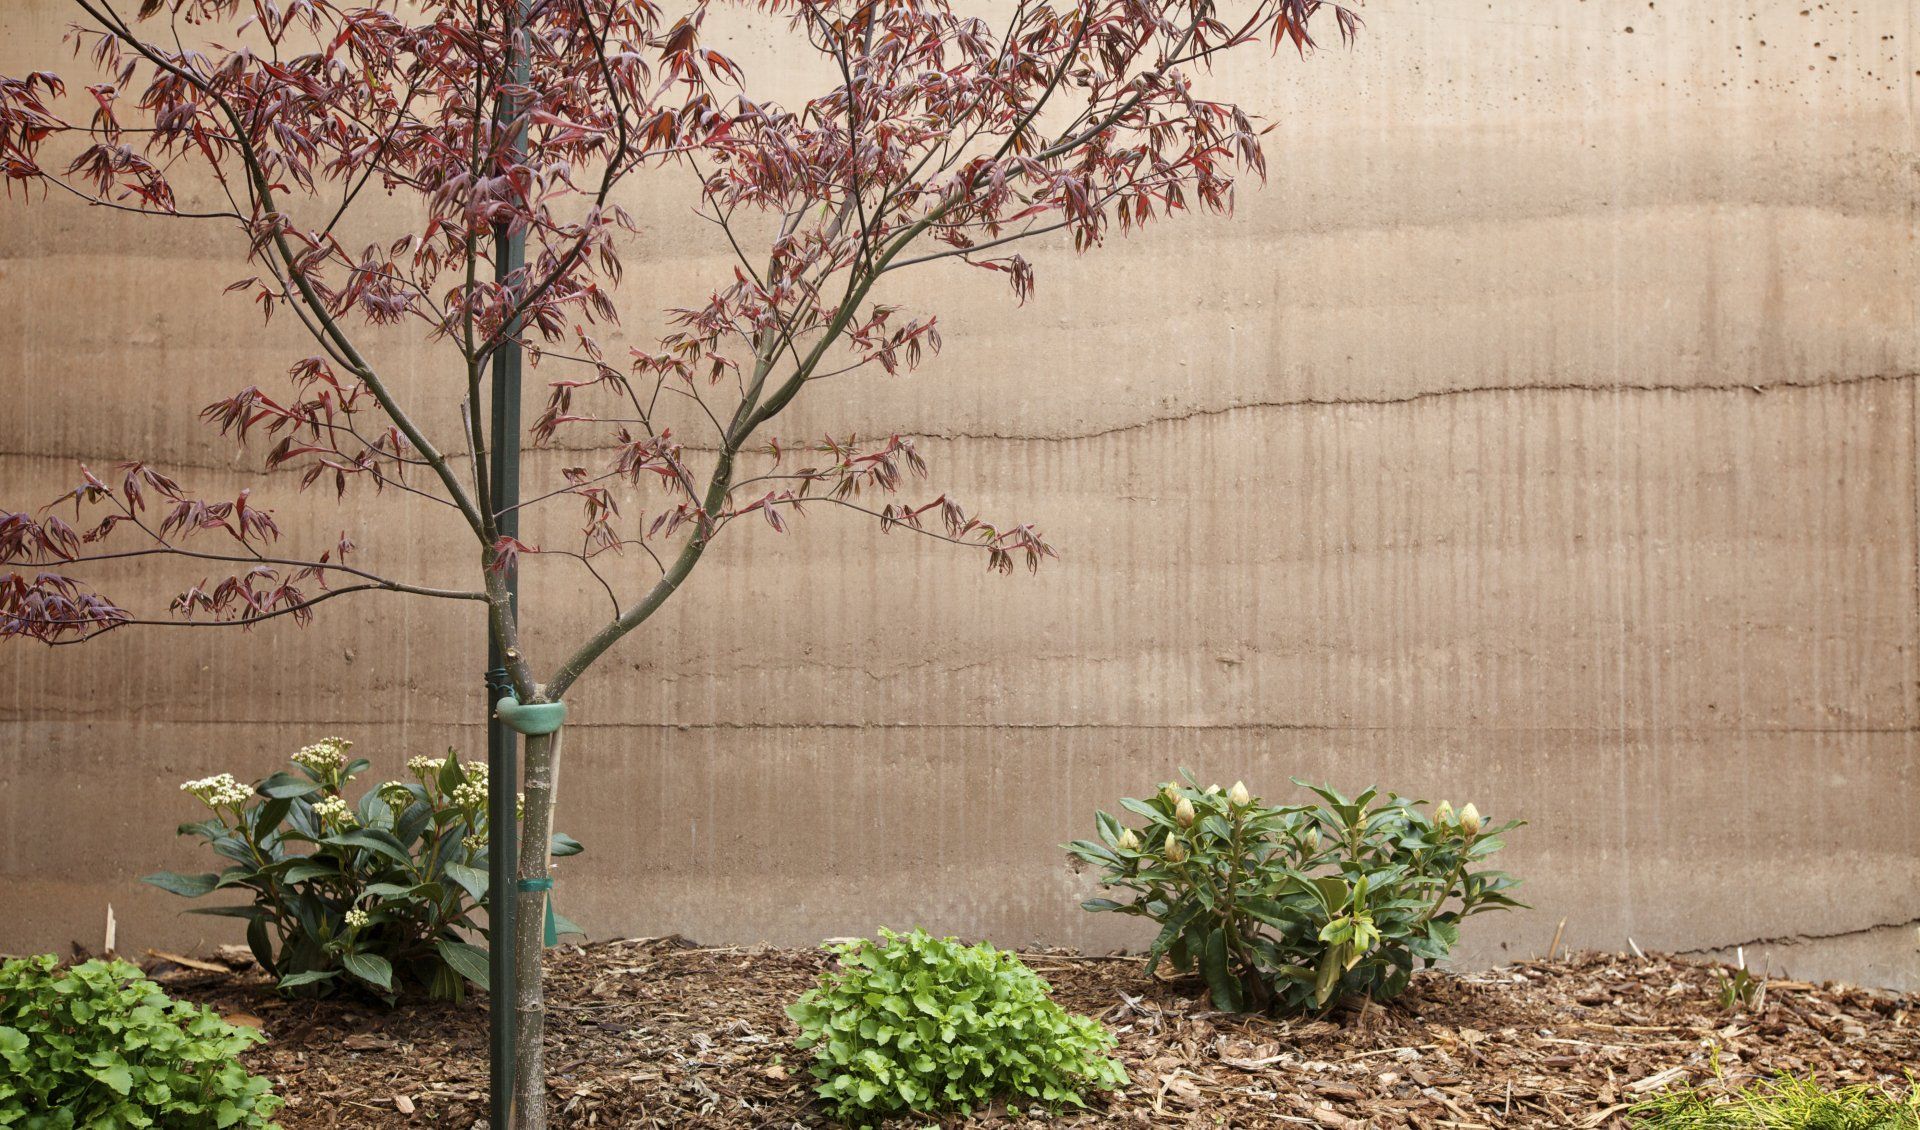 rammed earth SIREWALL with  landscaping - tree, shrubs, and mulch